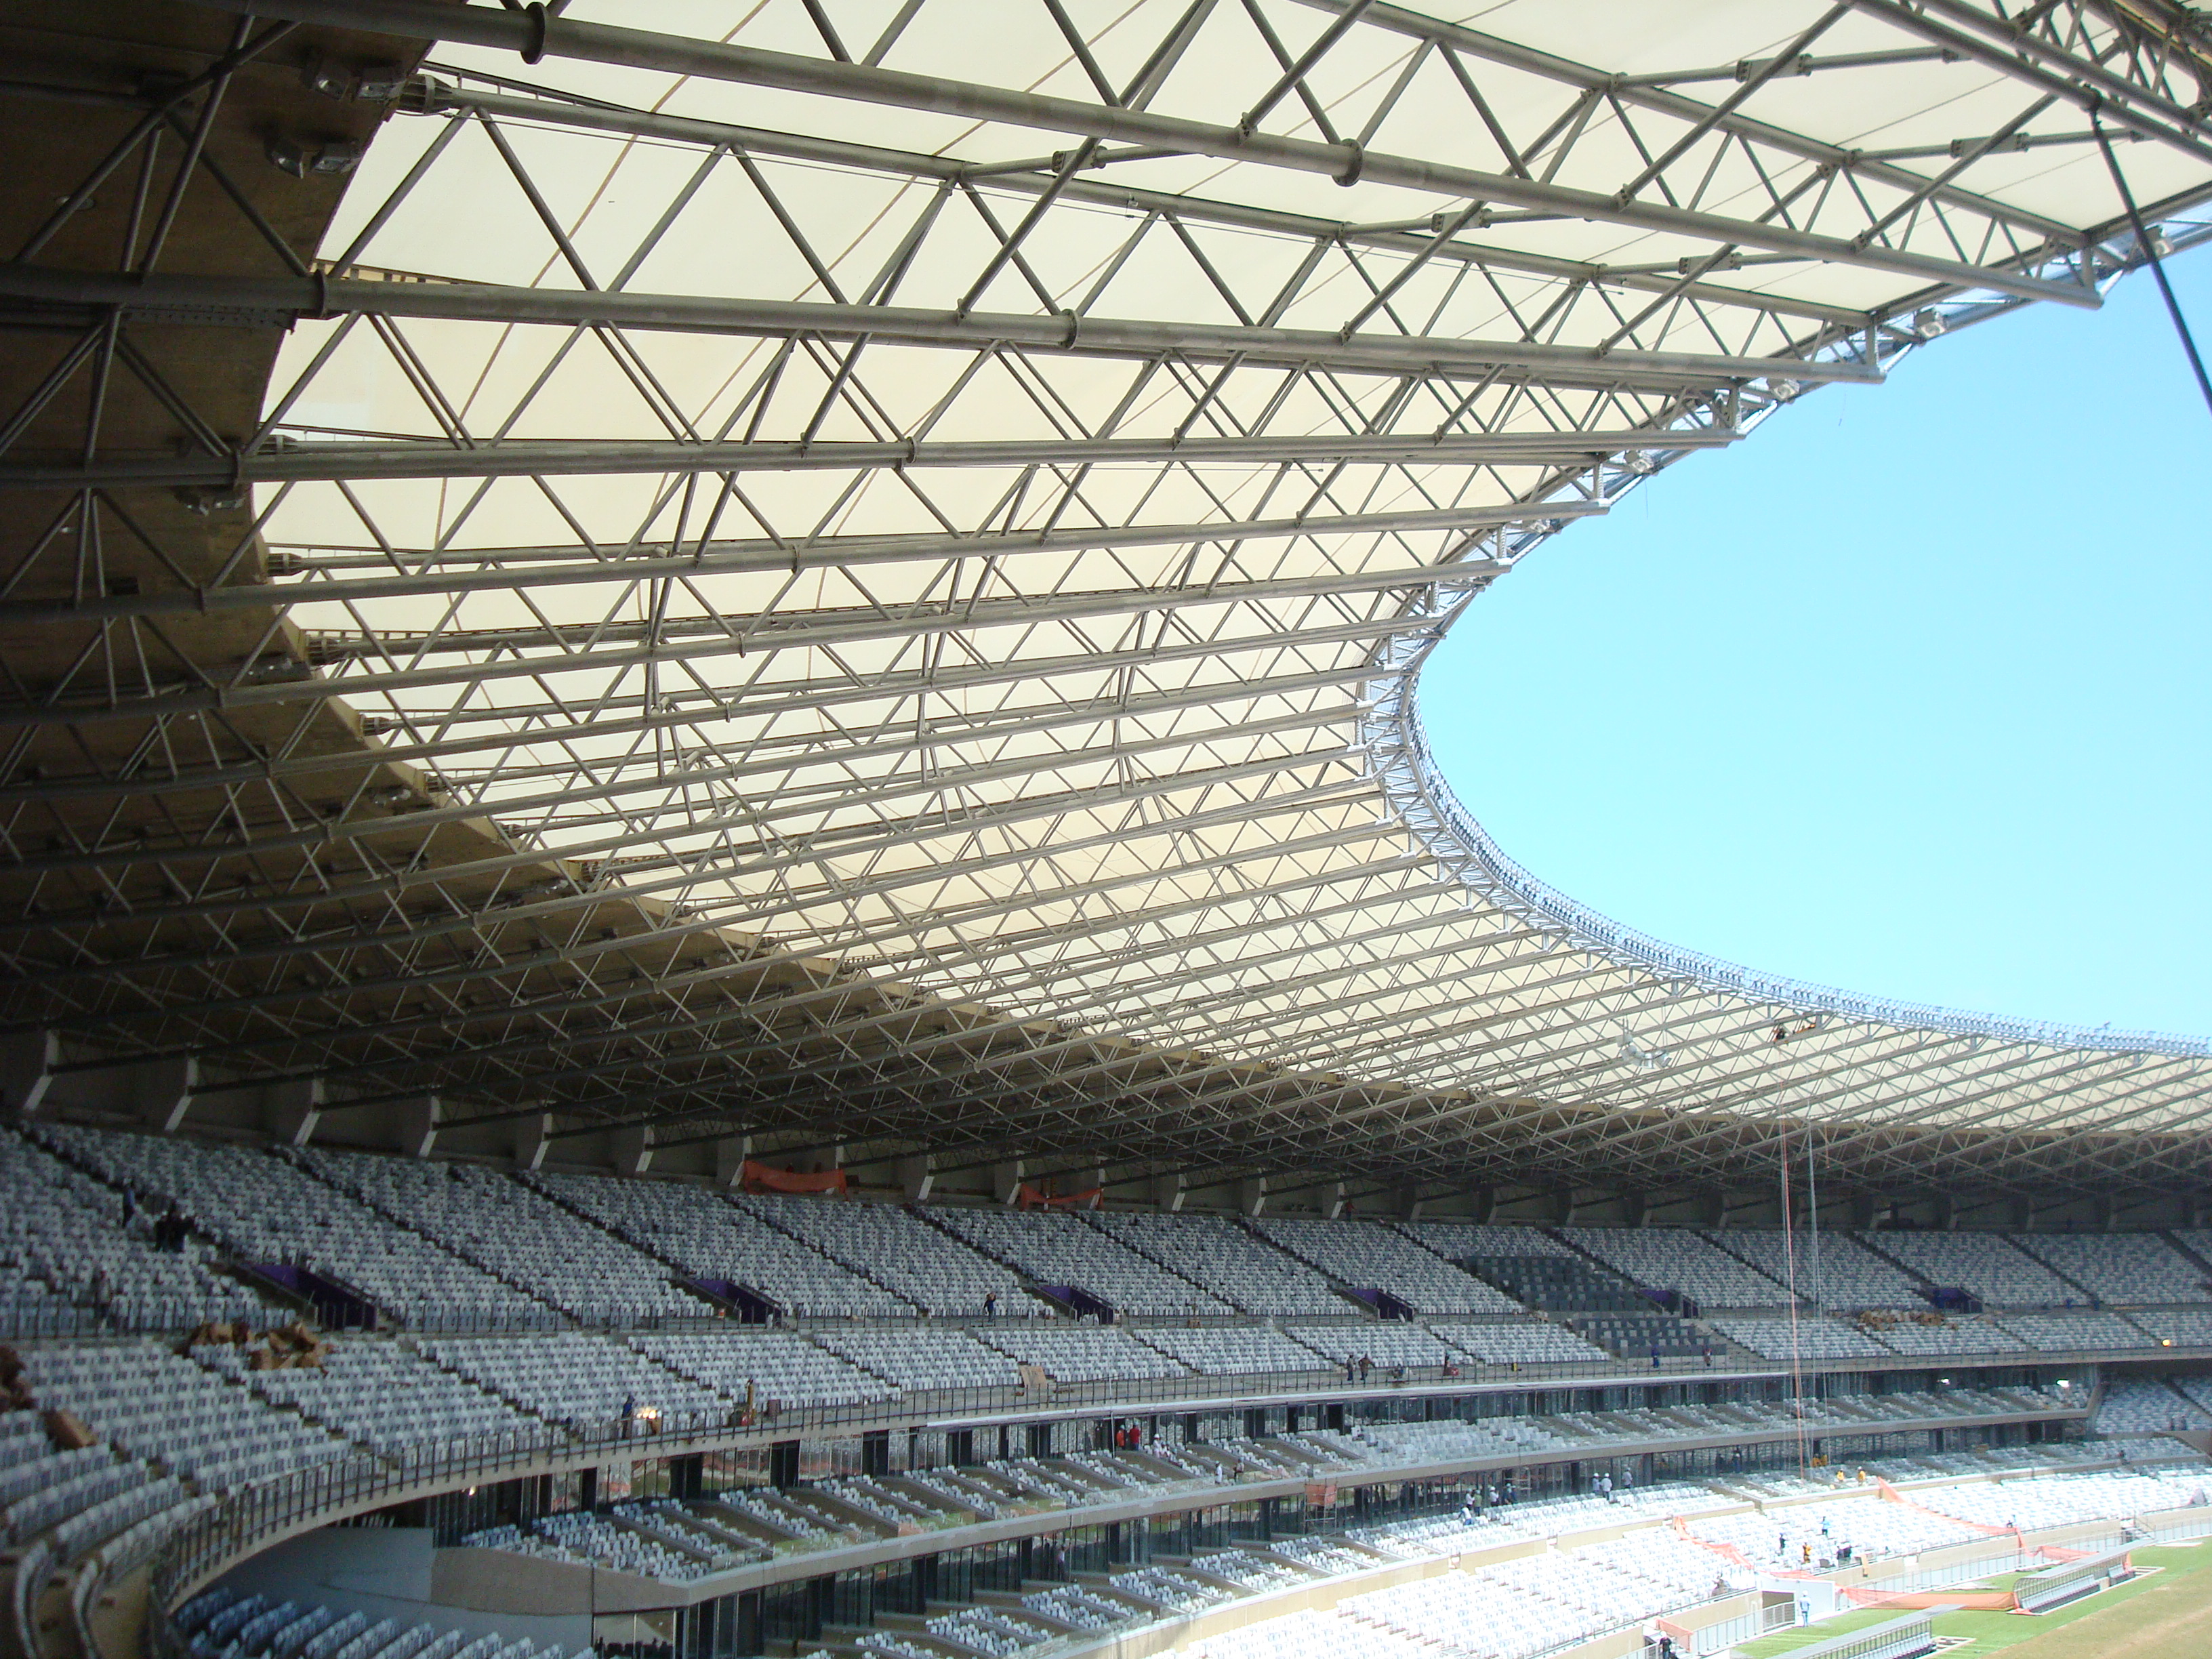 Estadio Mineirão, built in 1965 and listed as a national monument of Brazil, underwent a three-year modernization project to prepare for hosting six of the FIFA World Cup matches.